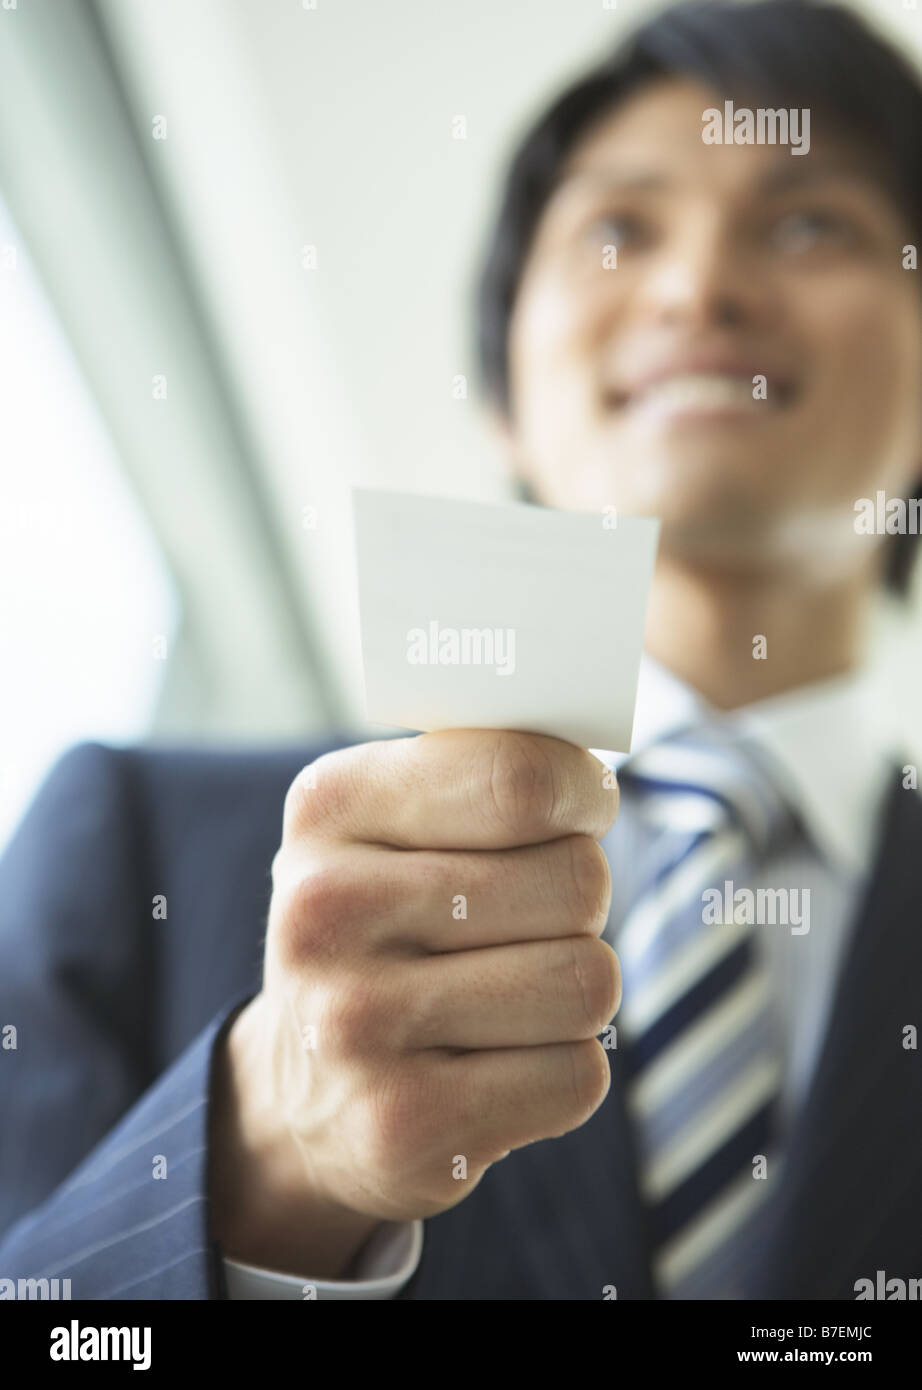 Exchanging business cards Stock Photo